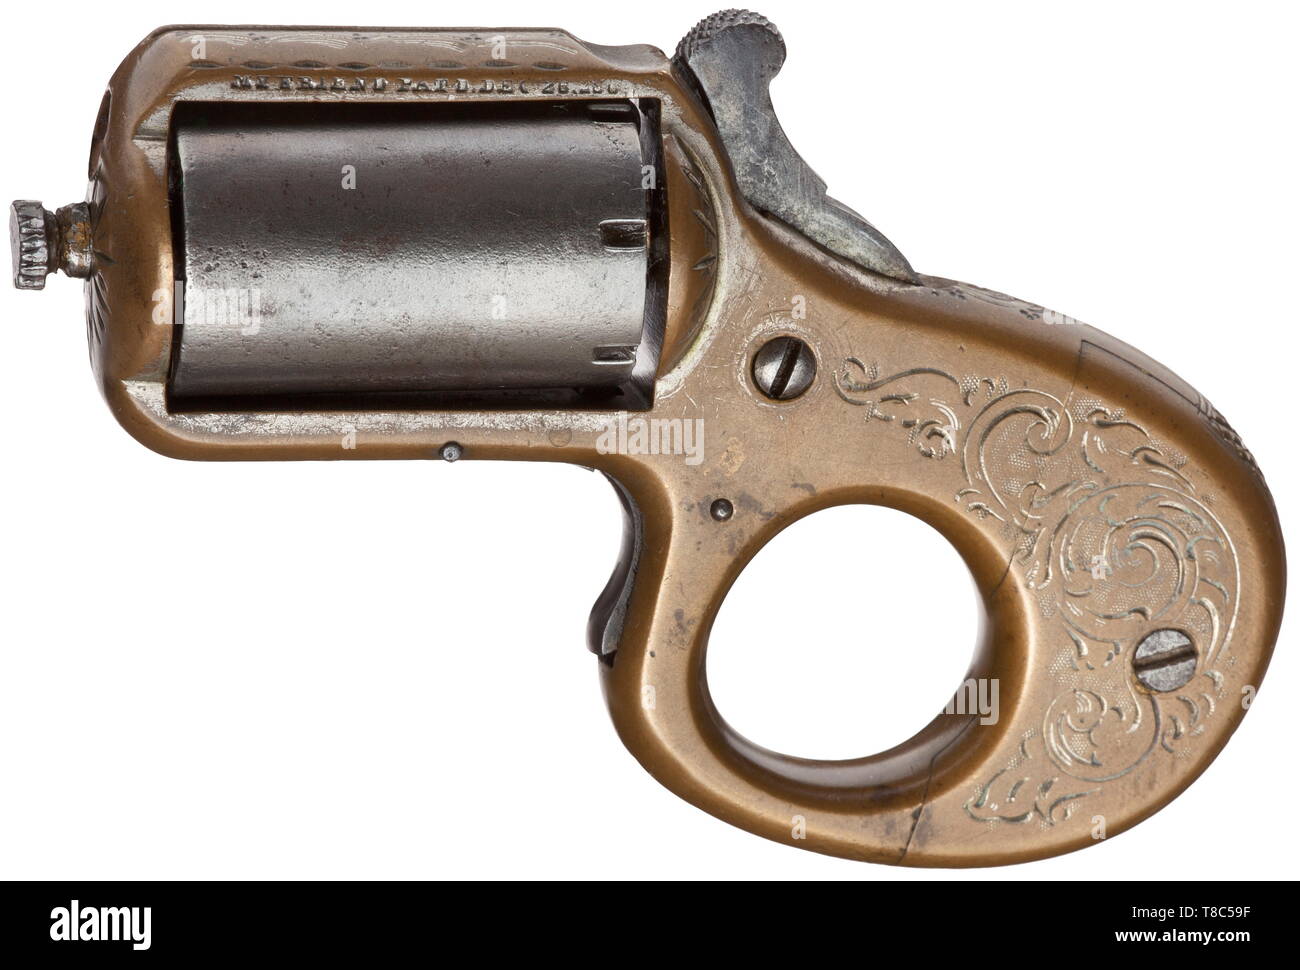 A James Reid pocket revolver 'My Friend' No. 12824. Seven shots, iron cylinder in cal. .22RF, brass frame with floral engravings and remnants of silver plating. Frame bridge on the left with patent data. Thread of base pin somewhat worn. Age and usage marks. Length 10.5 cm. Erwerbsscheinpflichtig. historic, historical, civil handgun, civil handguns, handheld, gun, guns, firearm, fire arm, firearms, fire arms, weapons, arms, weapon, arm, 19th century, Additional-Rights-Clearance-Info-Not-Available Stock Photo